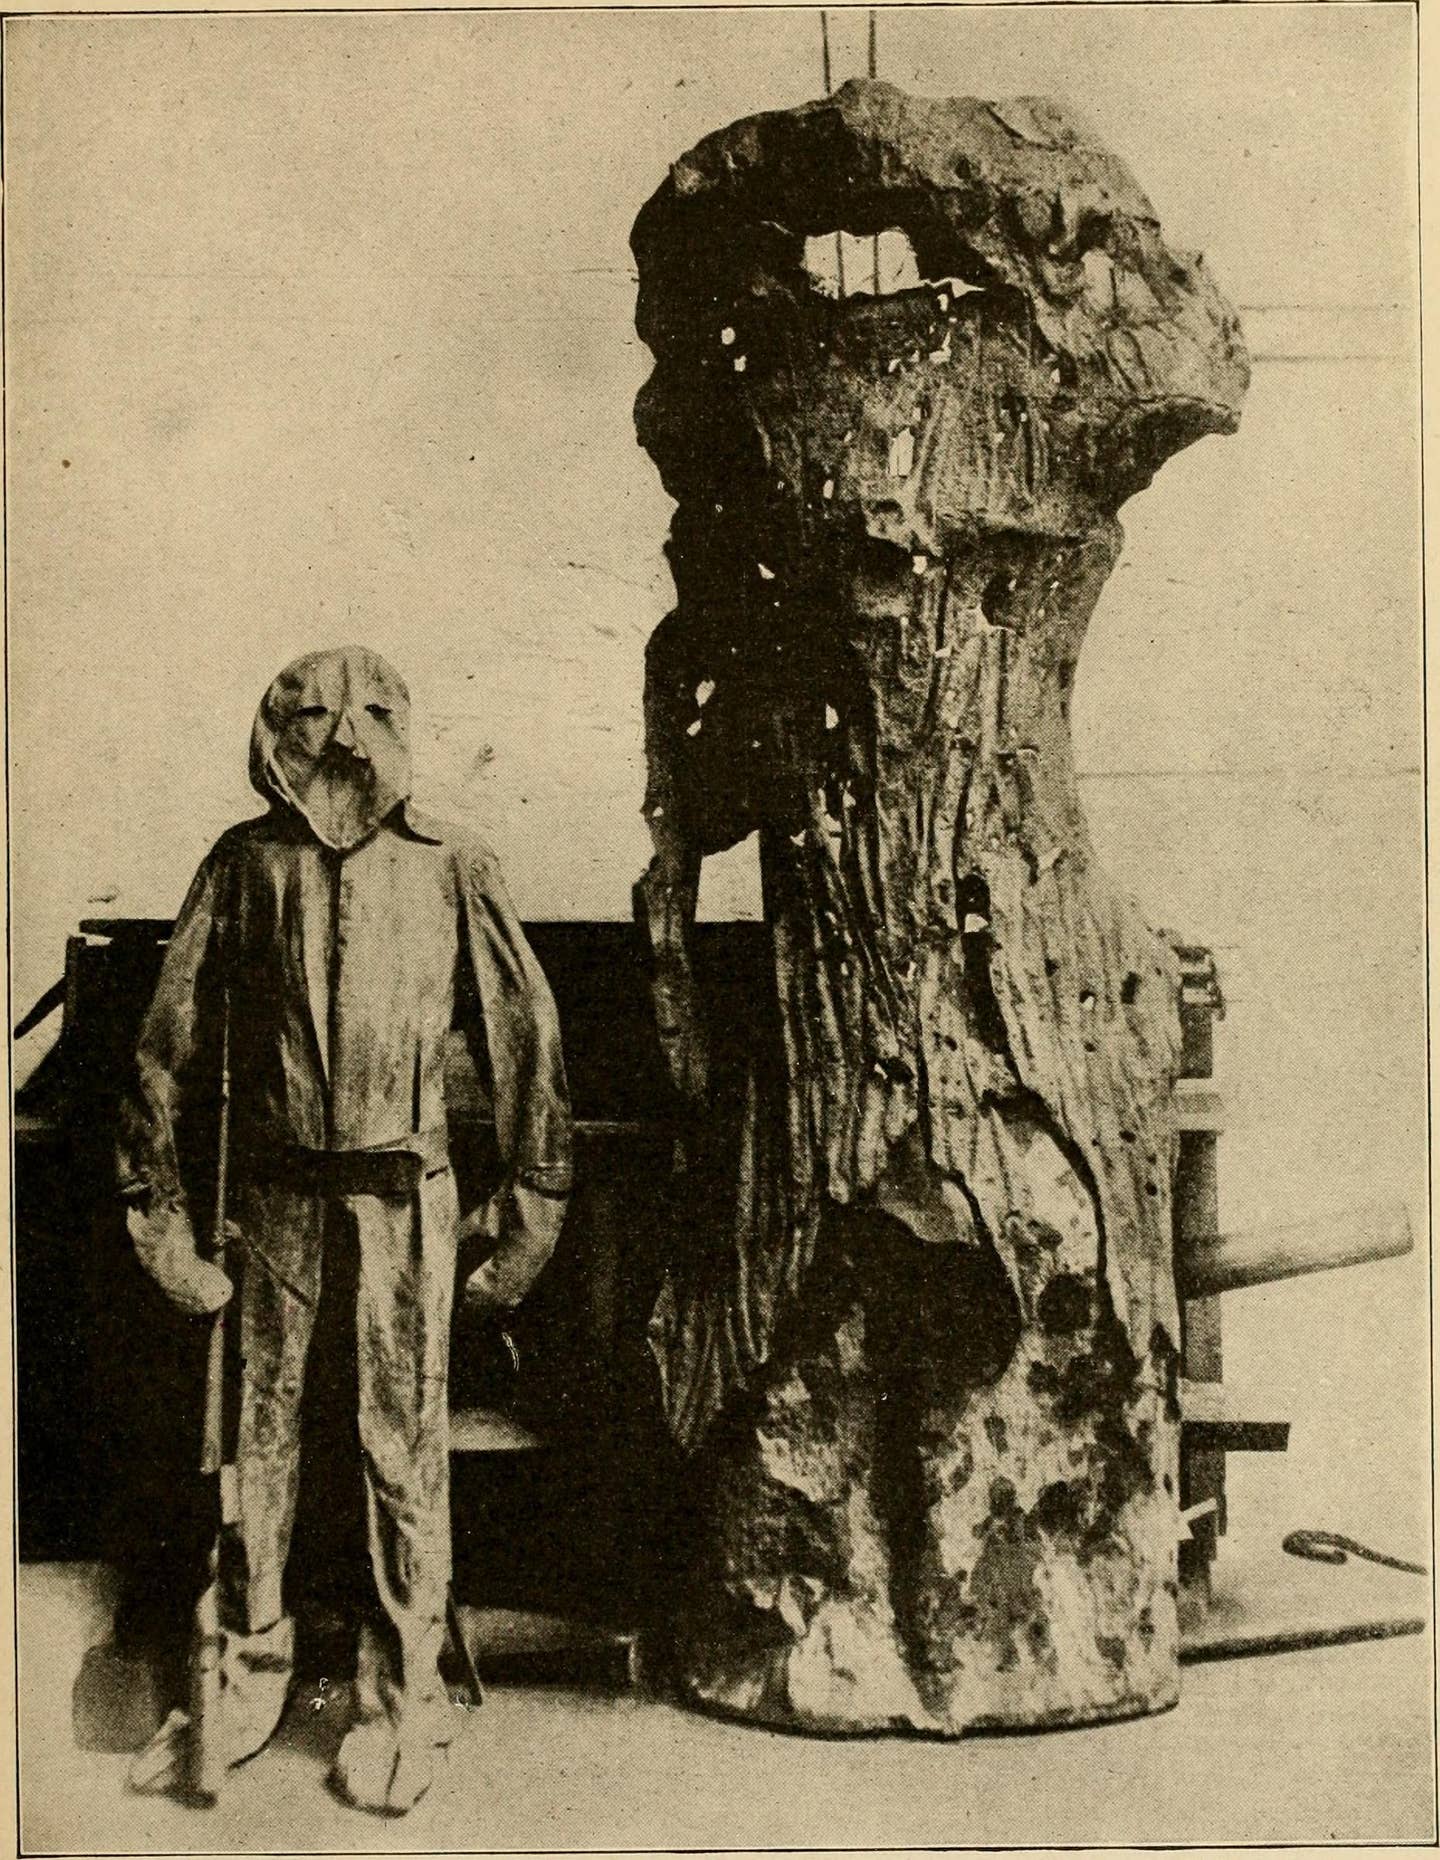 A German sniper suit and a fake tree, used to fire from within, captured by the Allies in 1918. <em>The People’s War Book; History, Cyclopaedia and Chronology of the Great World War/Wikimedia Commons</em>